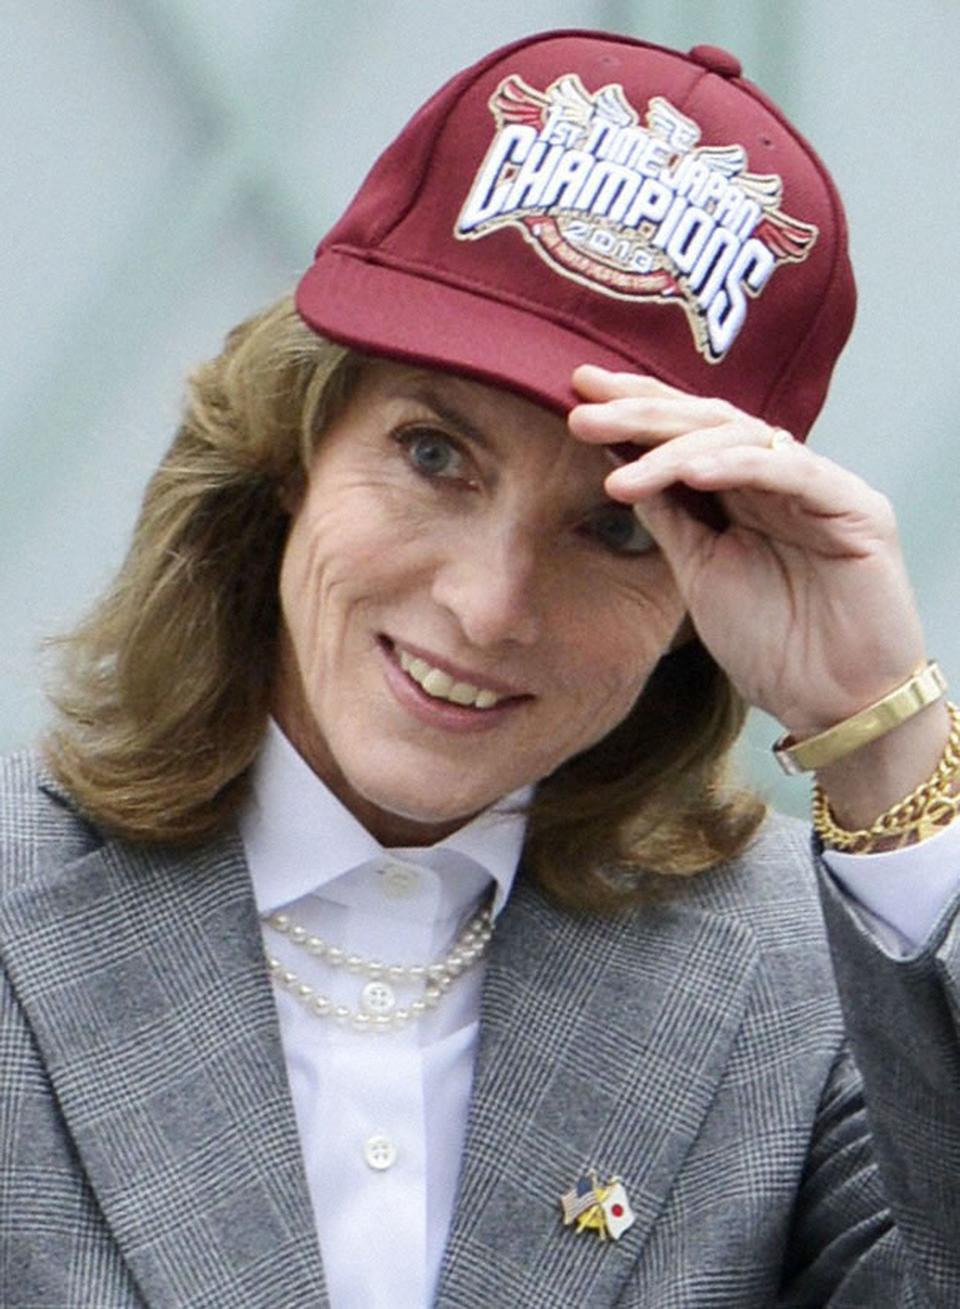 New U.S. Ambassador to Japan Caroline Kennedy puts on a cap of Rakuten Golden Eagles baseball team cap as she poses for a photo during her visit in Sendai, Japan